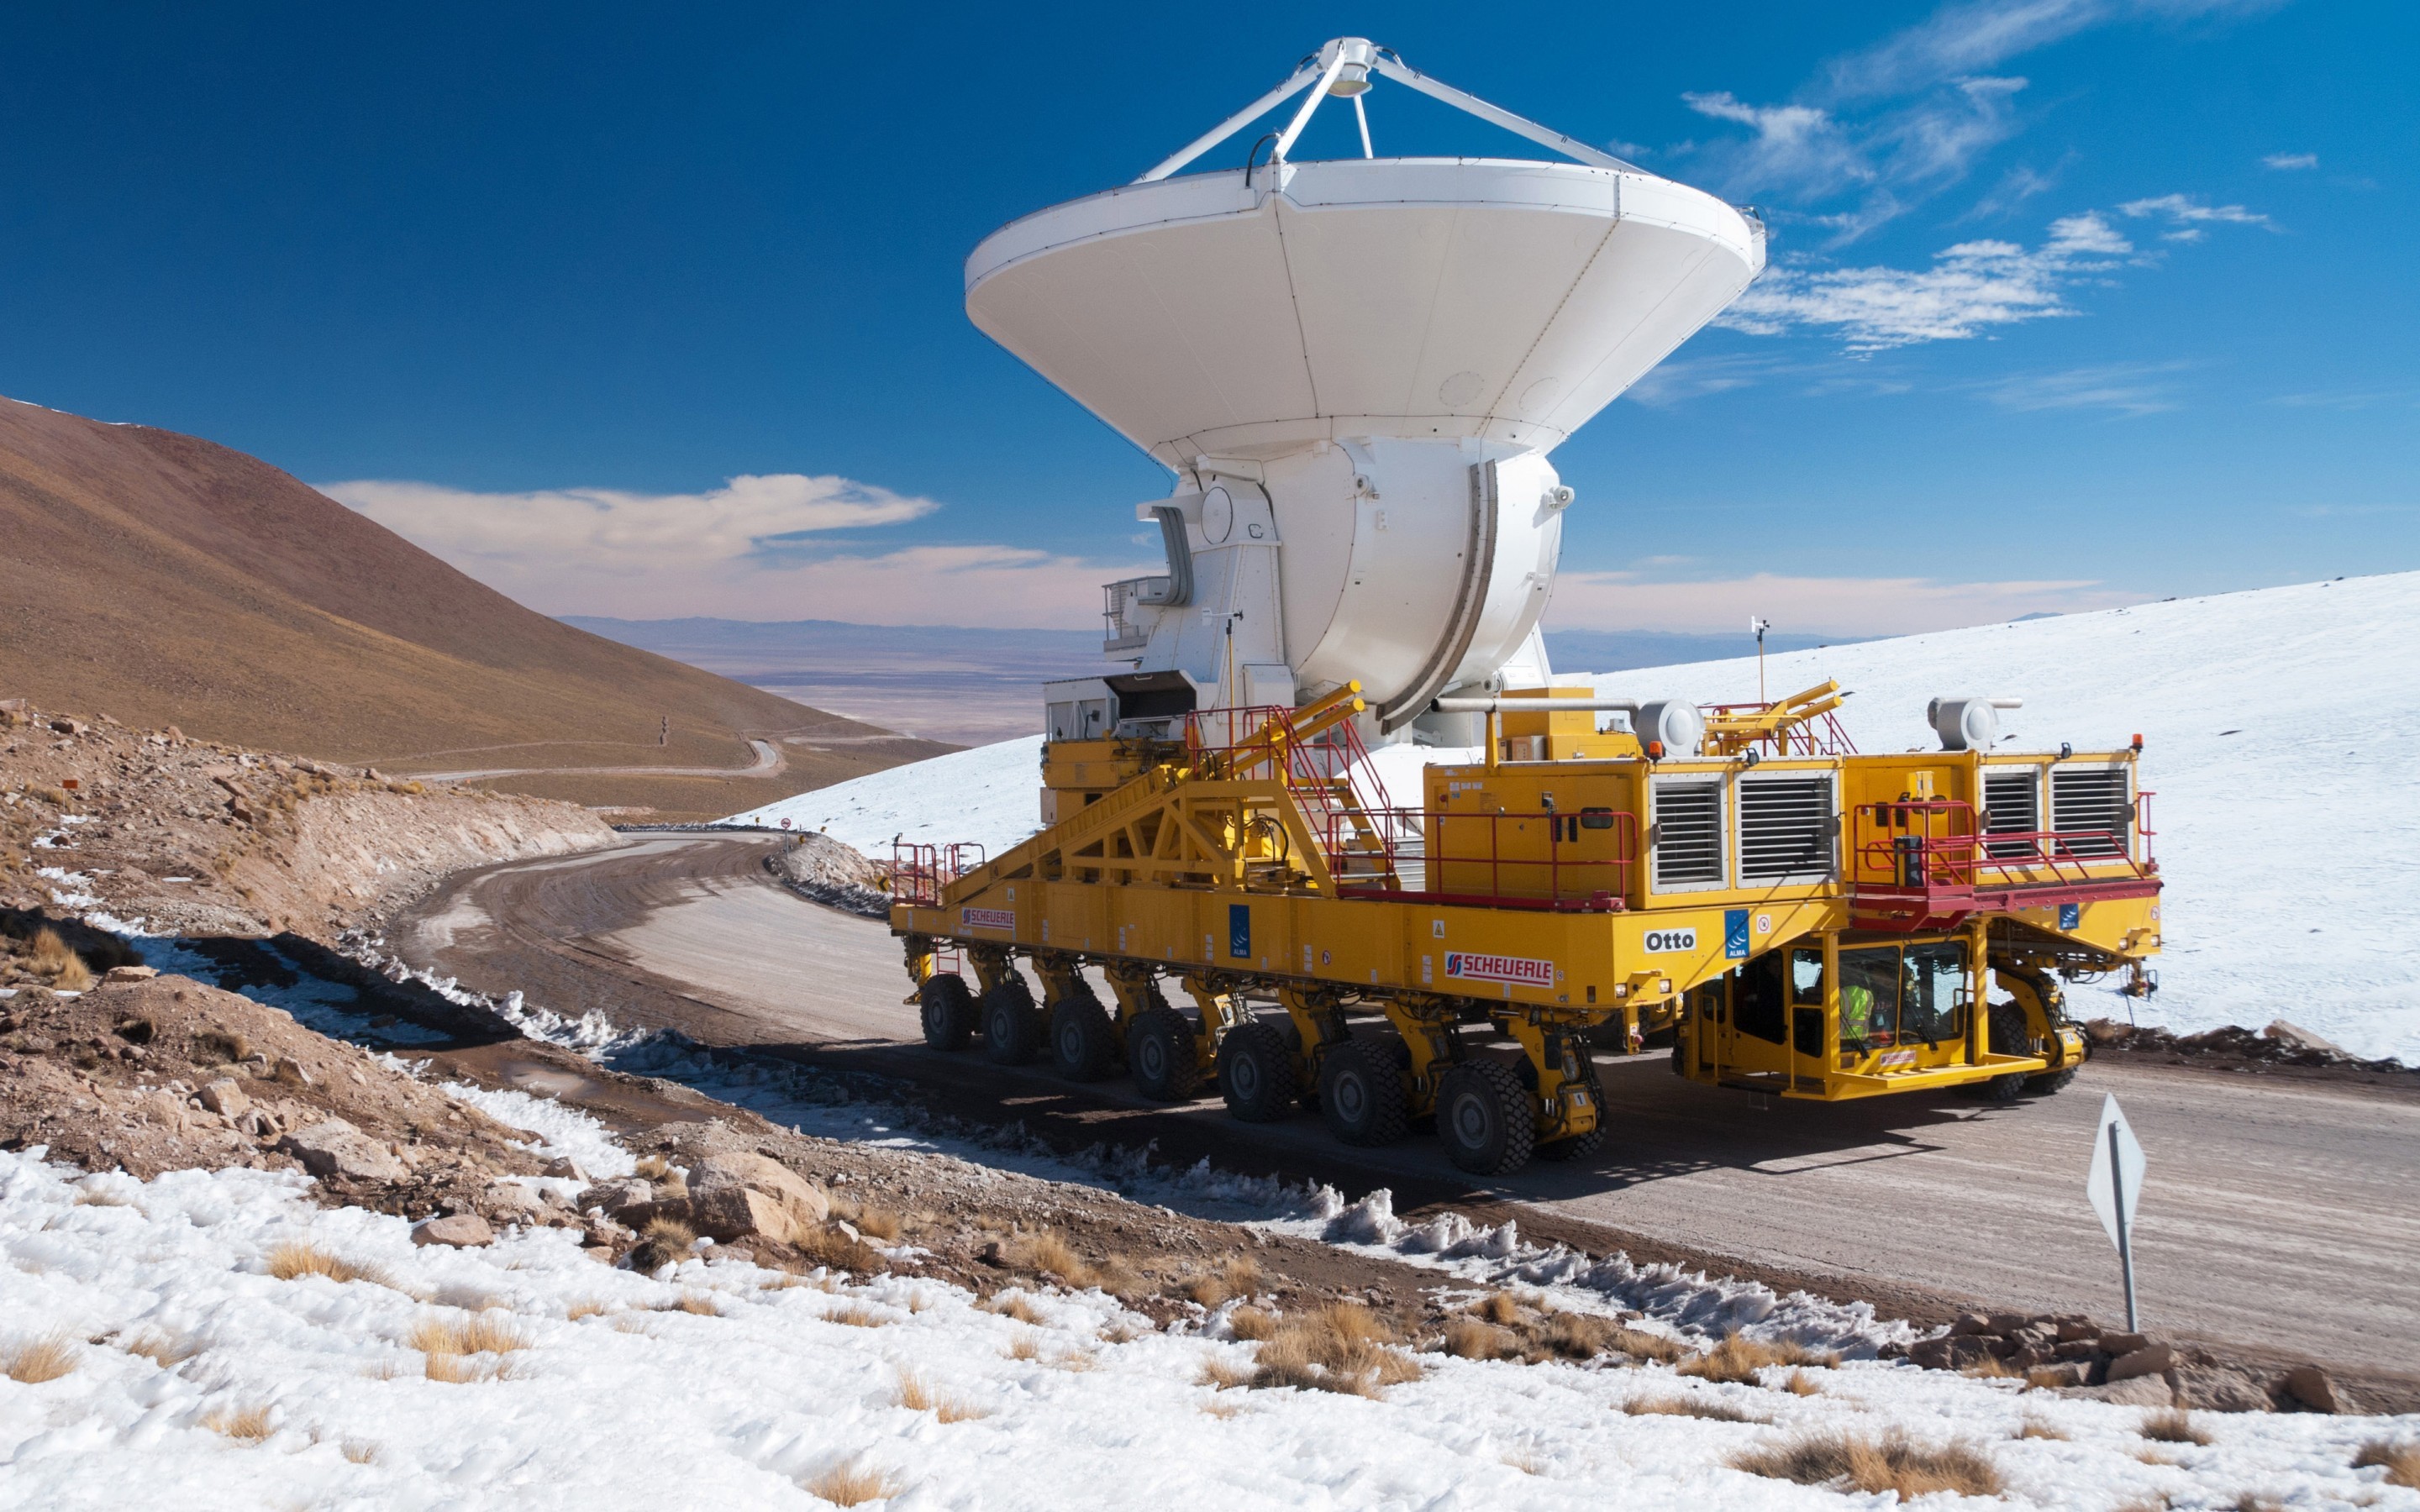 General 2880x1800 vehicle nature hills clouds telescope observatory ALMA Observatory Chile road winter snow wheels rocks heavy equipment